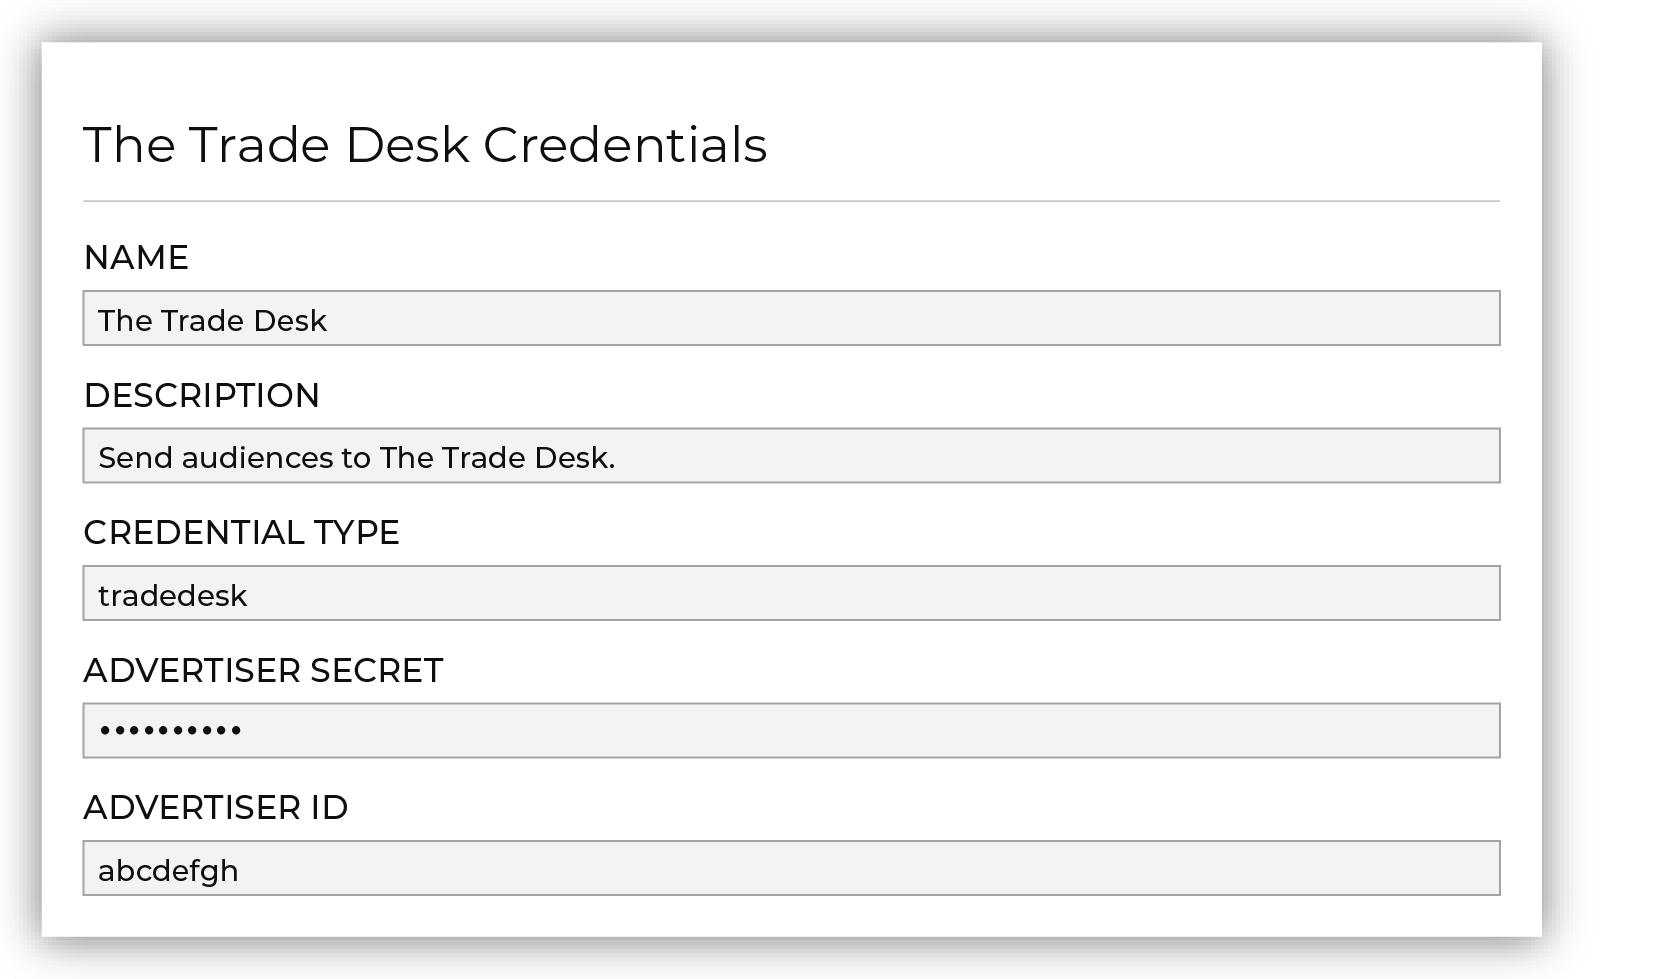 Set the following credentials for The Trade Desk.